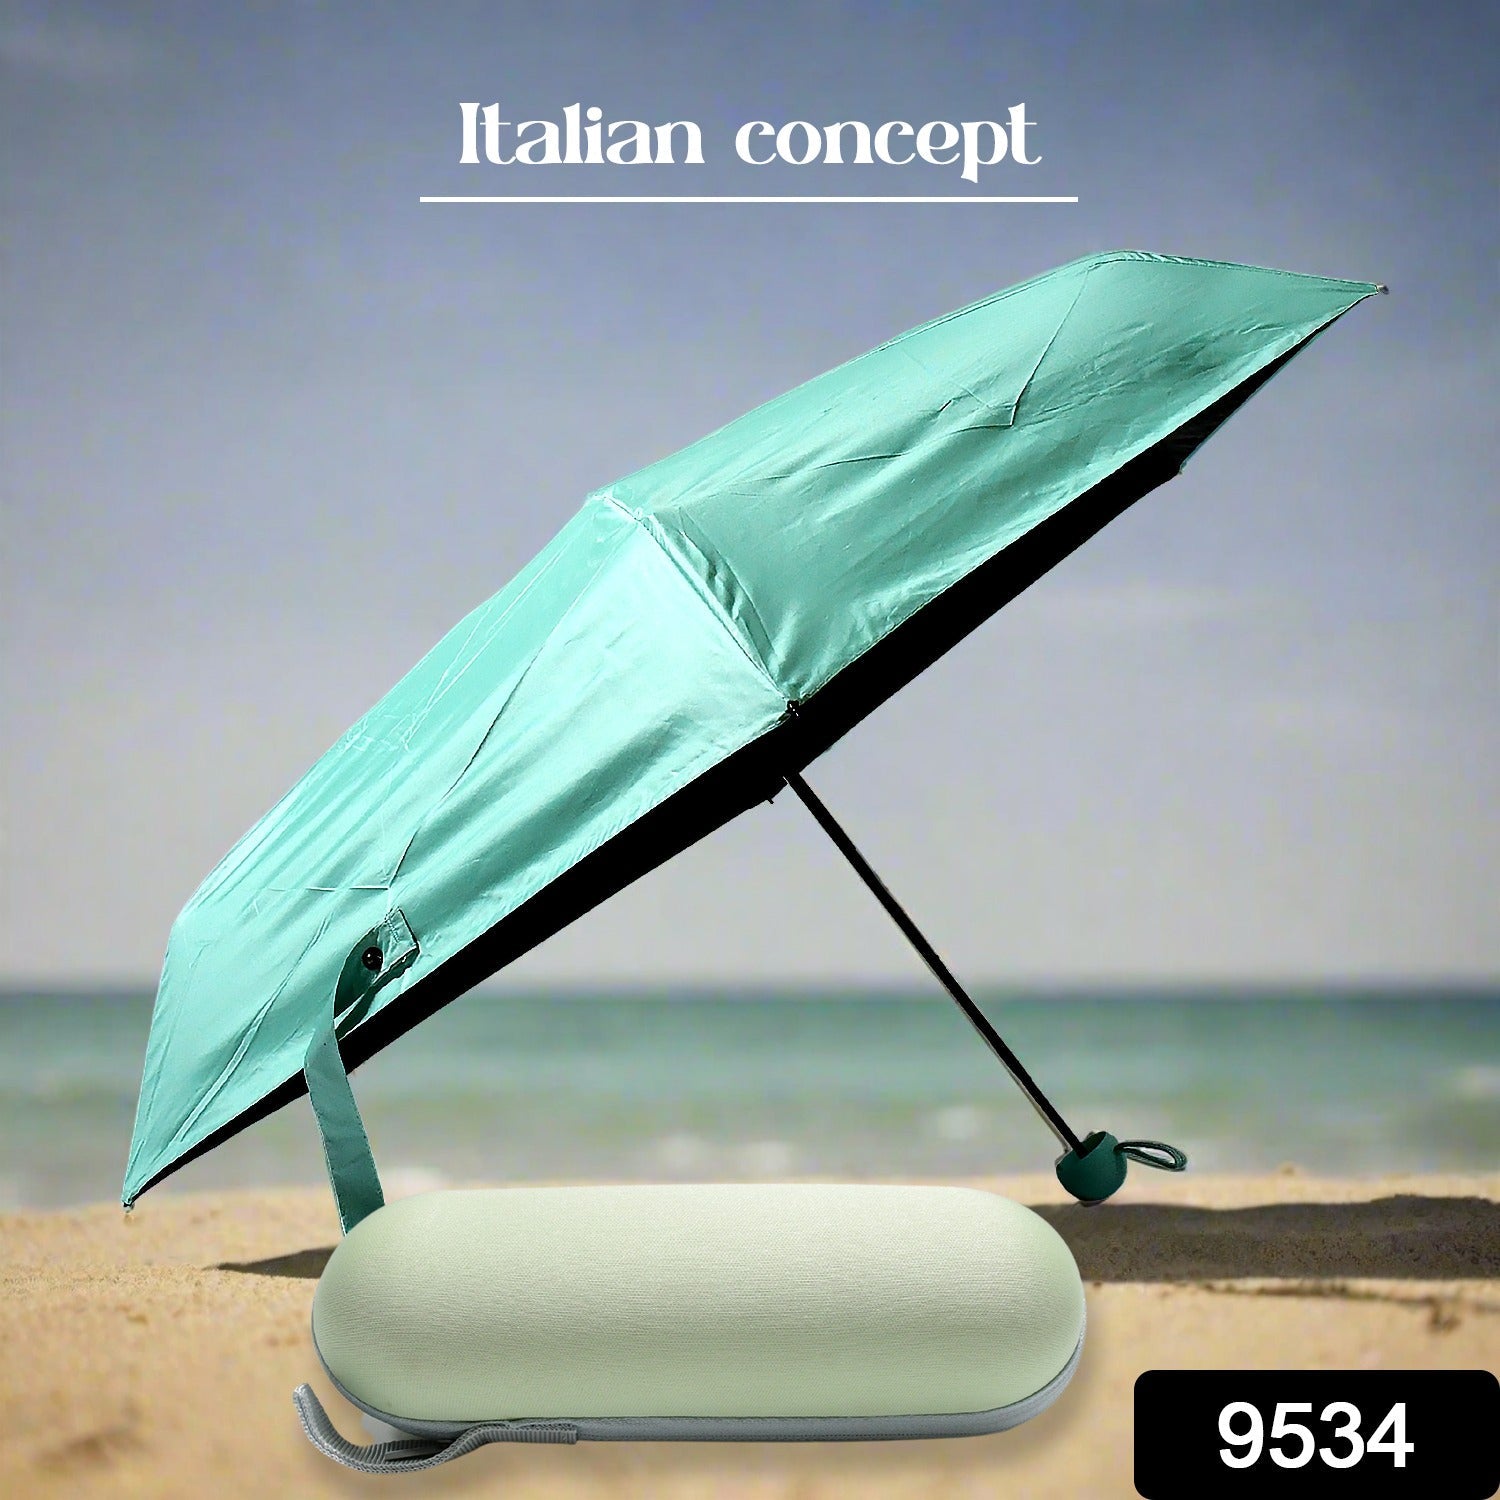 9534 5 Fold Manual Open Umbrella With Capsule Case | Windproof, Sunproof & Rainproof with Sturdy Steel Shaft & Wrist Straps | Easy to Hold & Carry | Umbrella for Women, Men & Kids 